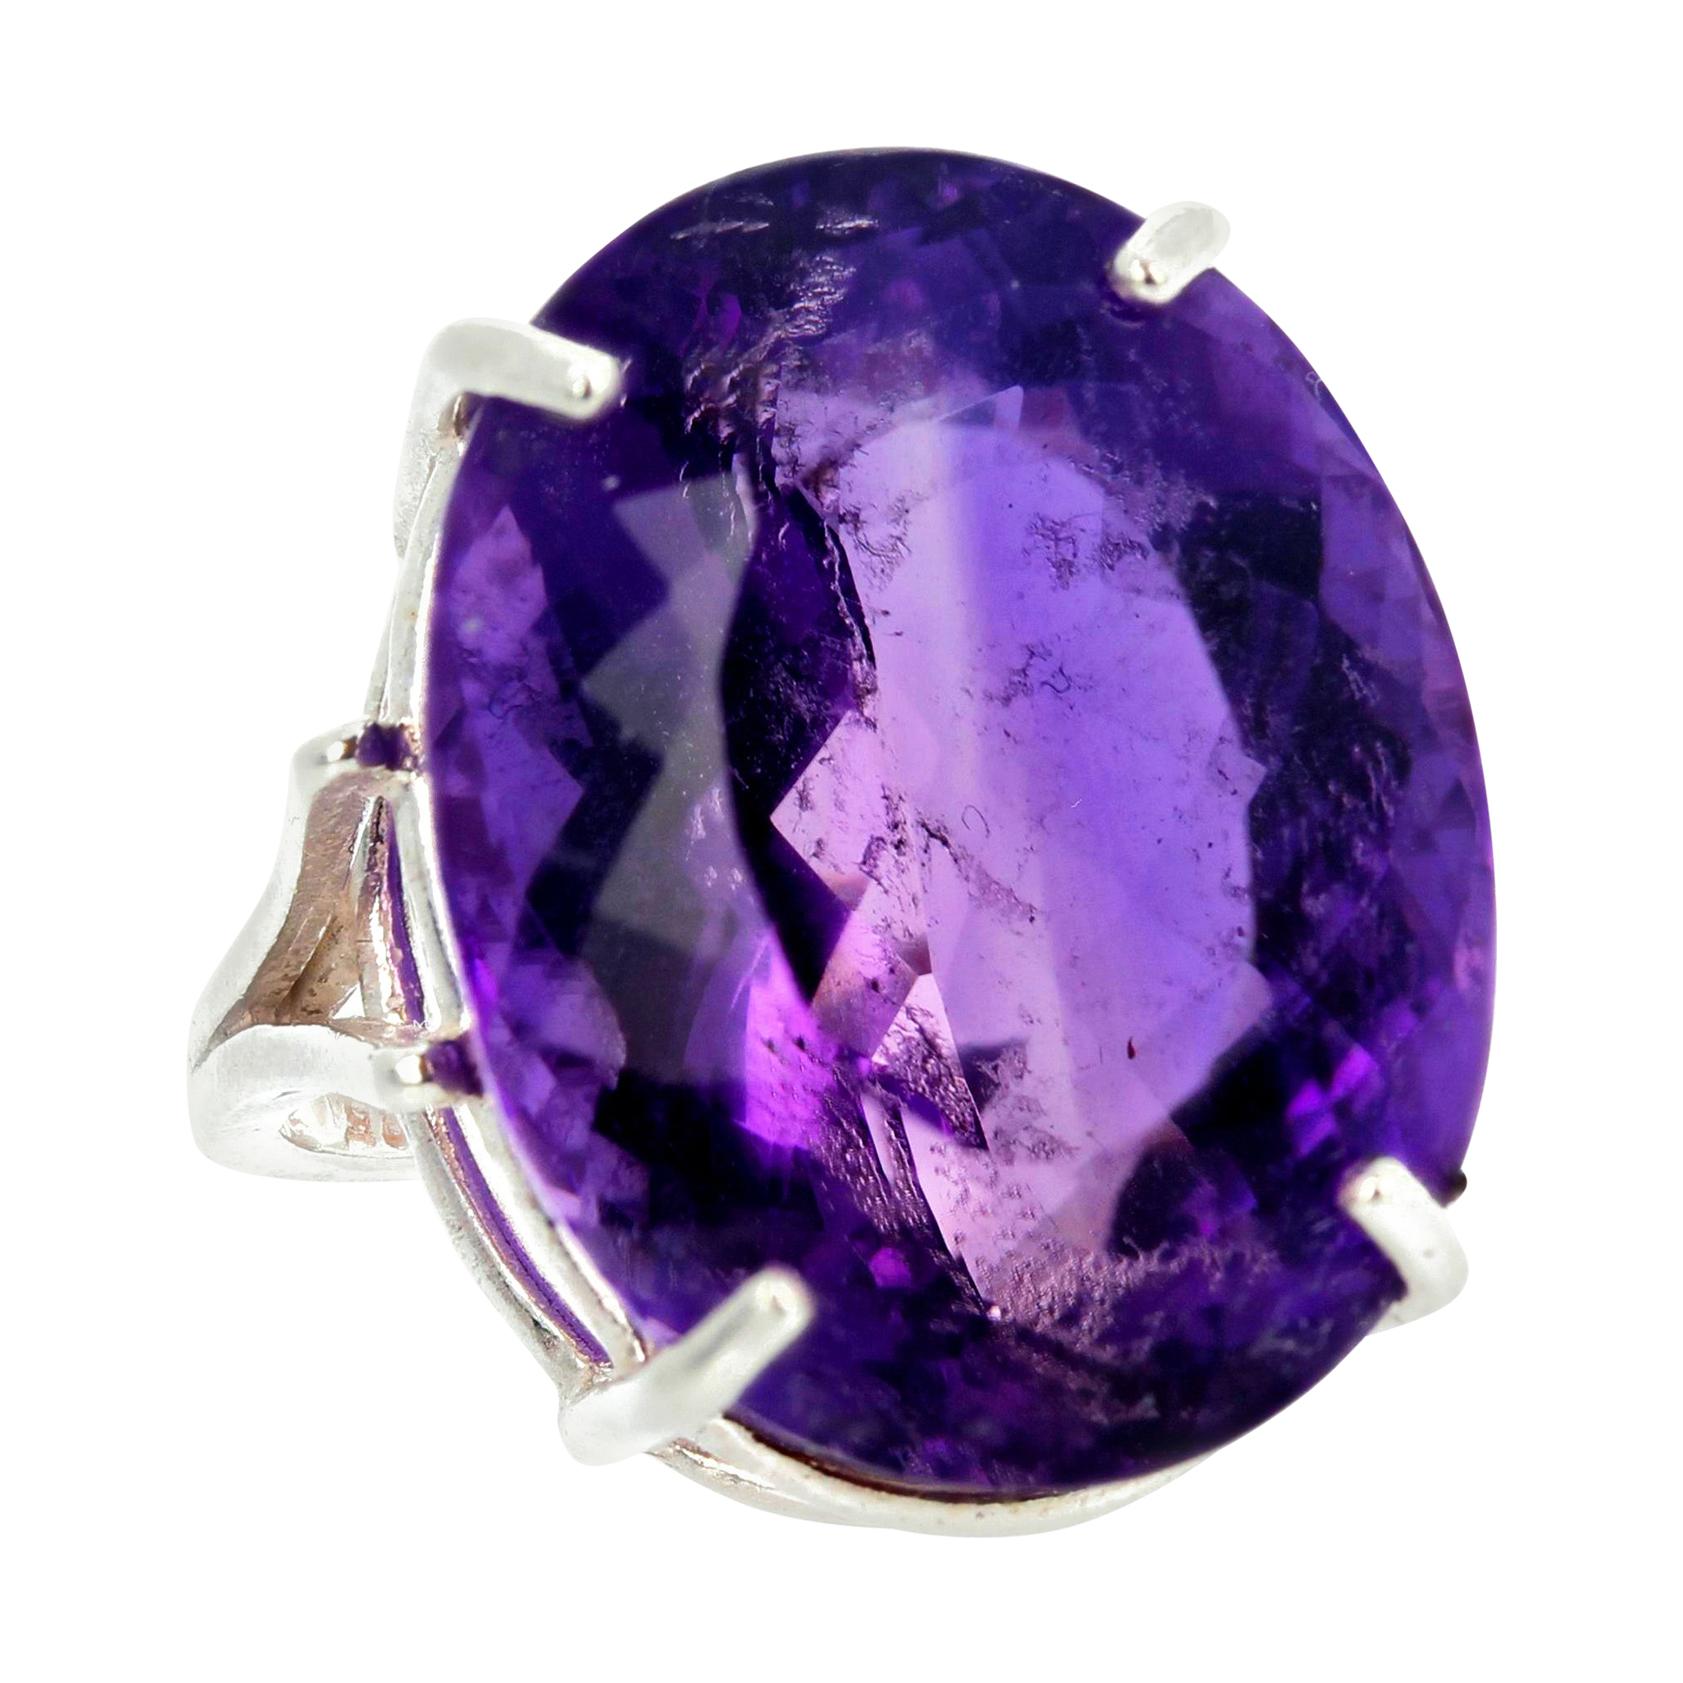 AJD Magnificent Large 30.2 Cts Intense Purple Amethyst Sterling Silver Ring